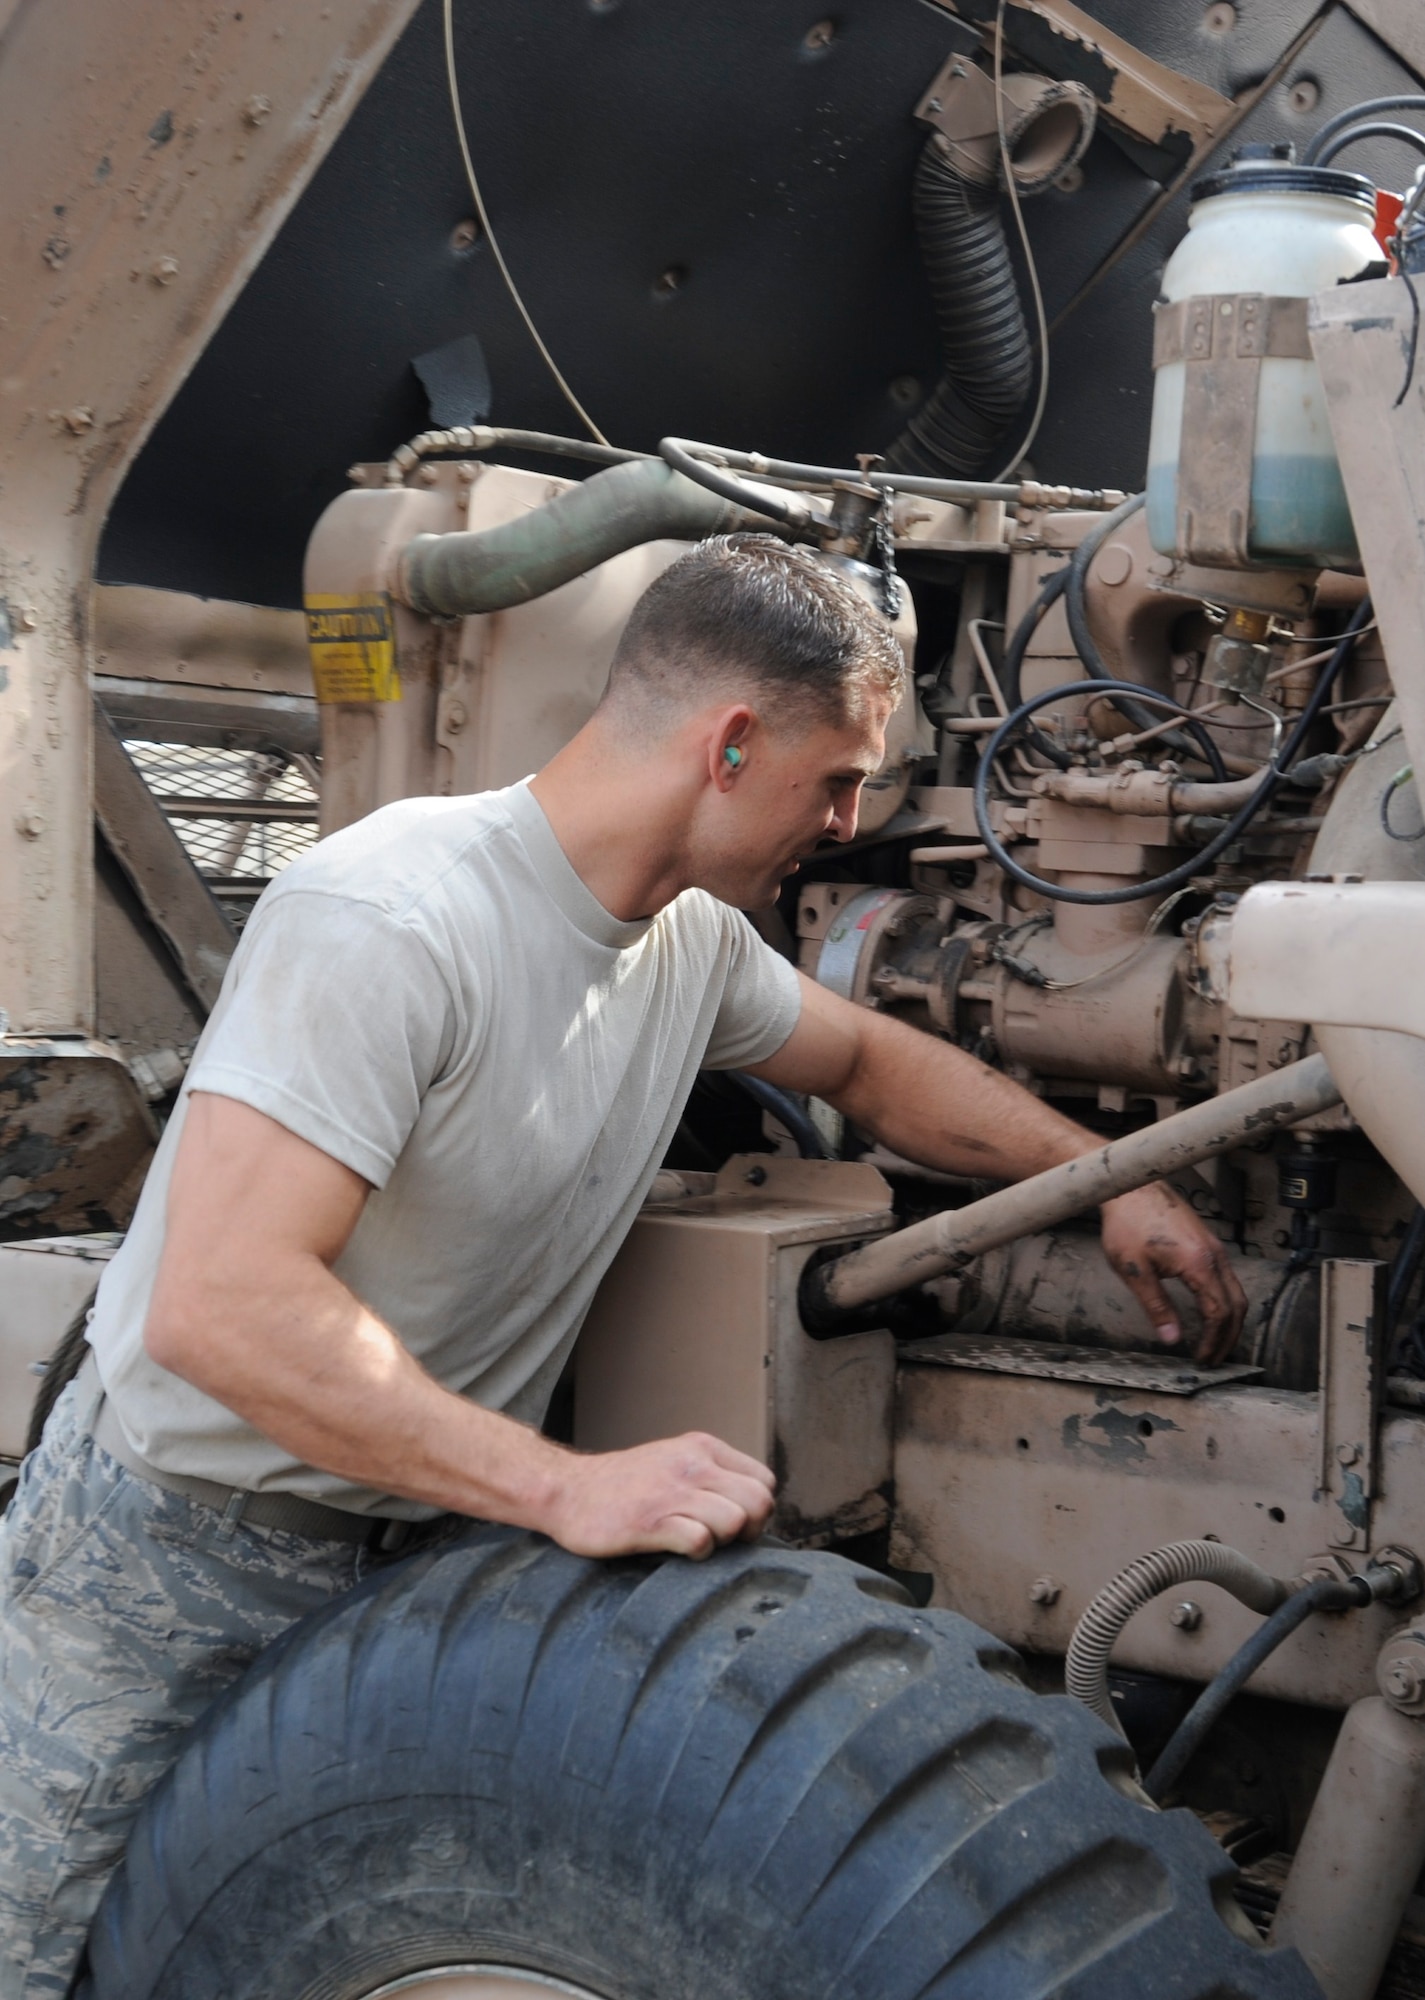 Tech. Sgt. Adam Heath examines a high-pressure oil line while working on an M-series wrecker at the Transit Center at Manas, Kyrgyzstan, July 26. Heath has spent two months overhauling the Transit Center’s only wrecker. He’s a 376th Expeditionary Logistics Readiness Squadron vehicle maintenance journeyman deployed here from the Utah Air National Guard. (U.S. Air Force photo/Tech. Sgt. Tammie Moore)